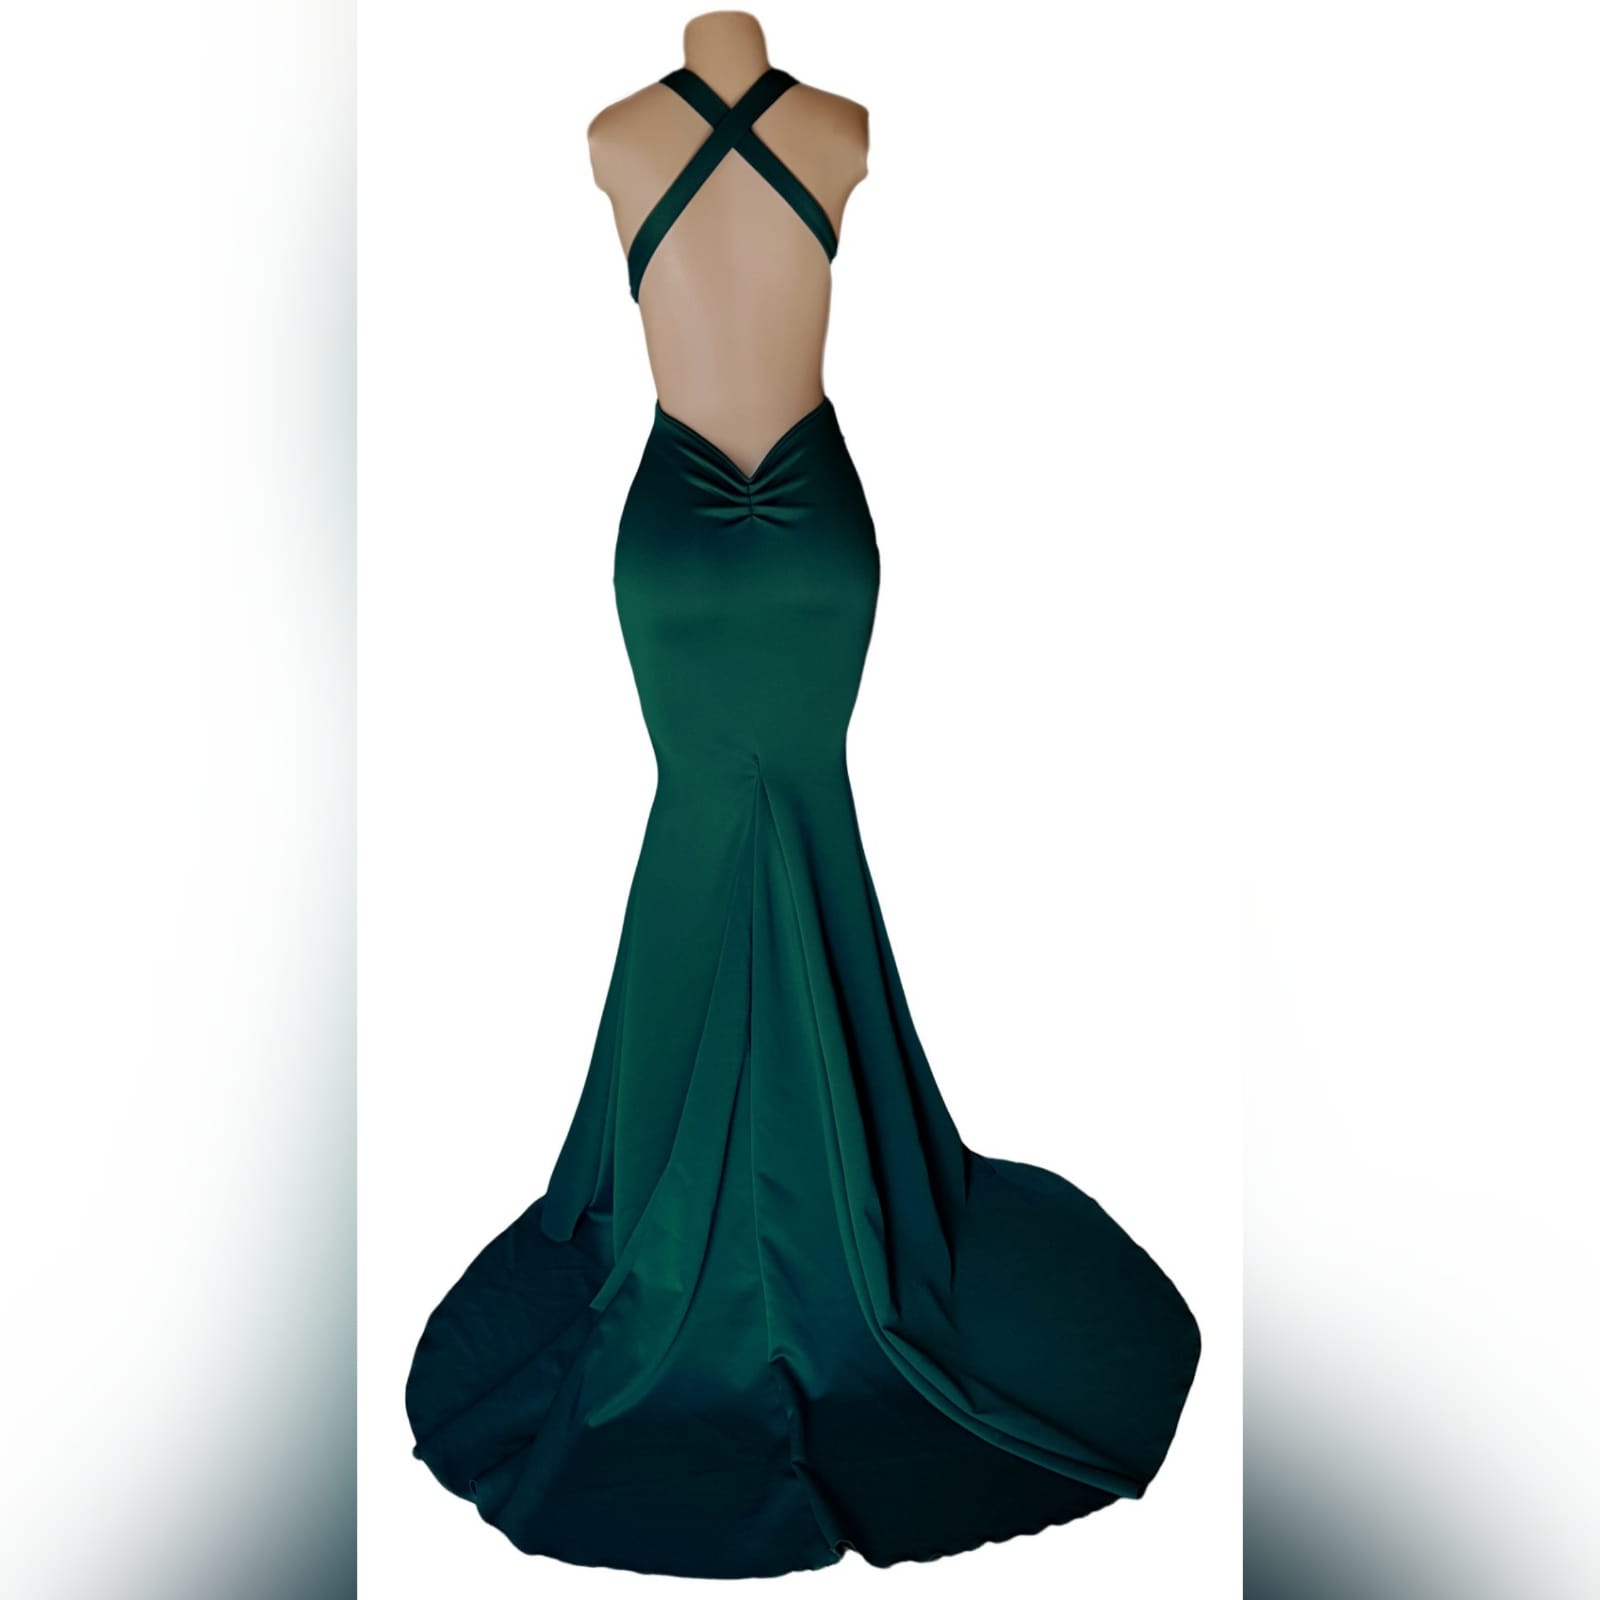 Emerald green soft mermaid matric farewell dress 6 emerald green soft mermaid matric farewell dress, with a v neckline, low open v back with pleated detail and crossed straps, with a train.